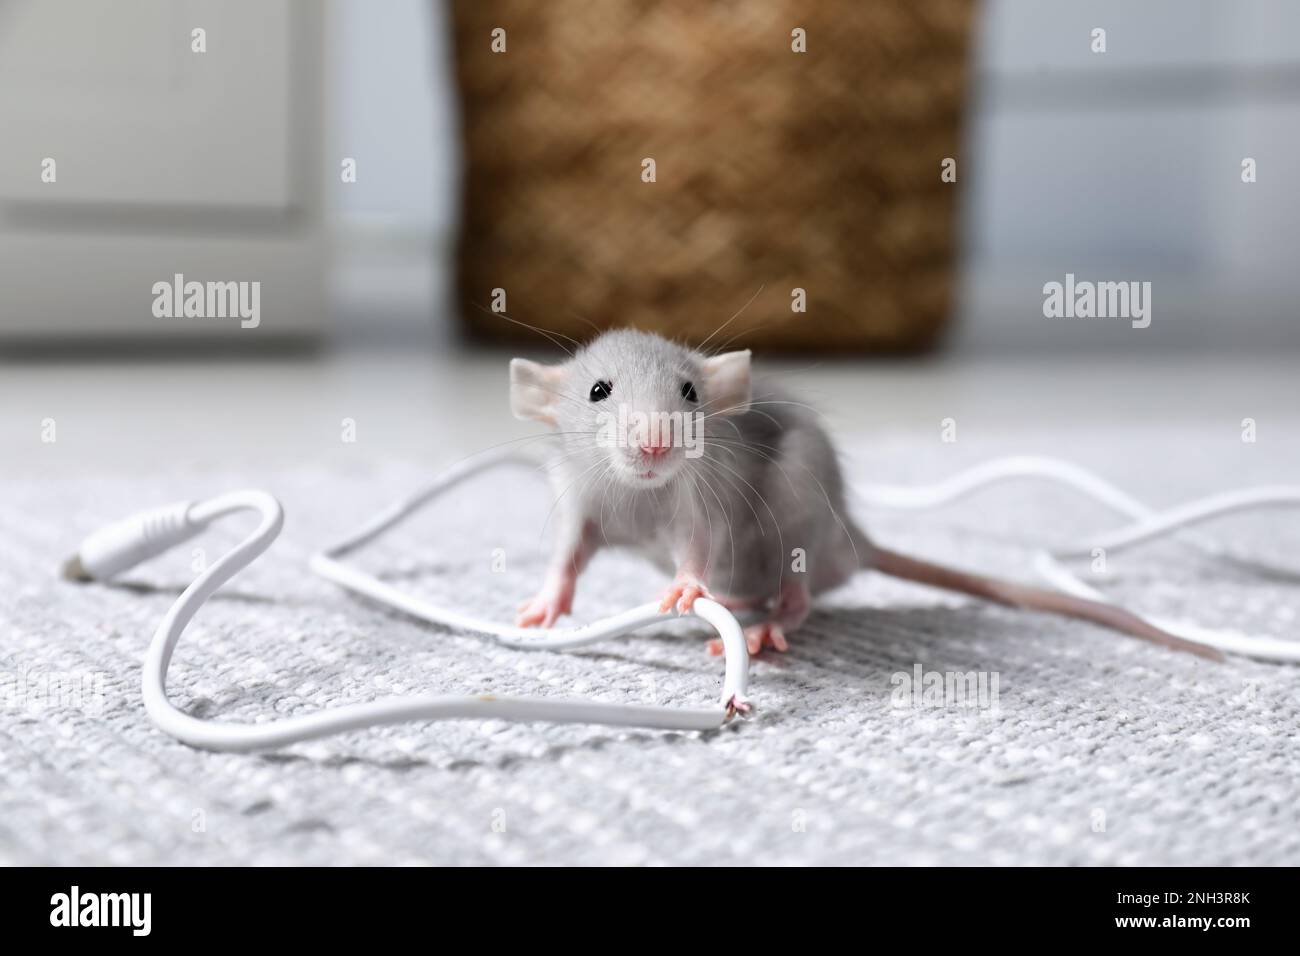 Rat with chewed electric wire on floor indoors. Pest control Stock Photo